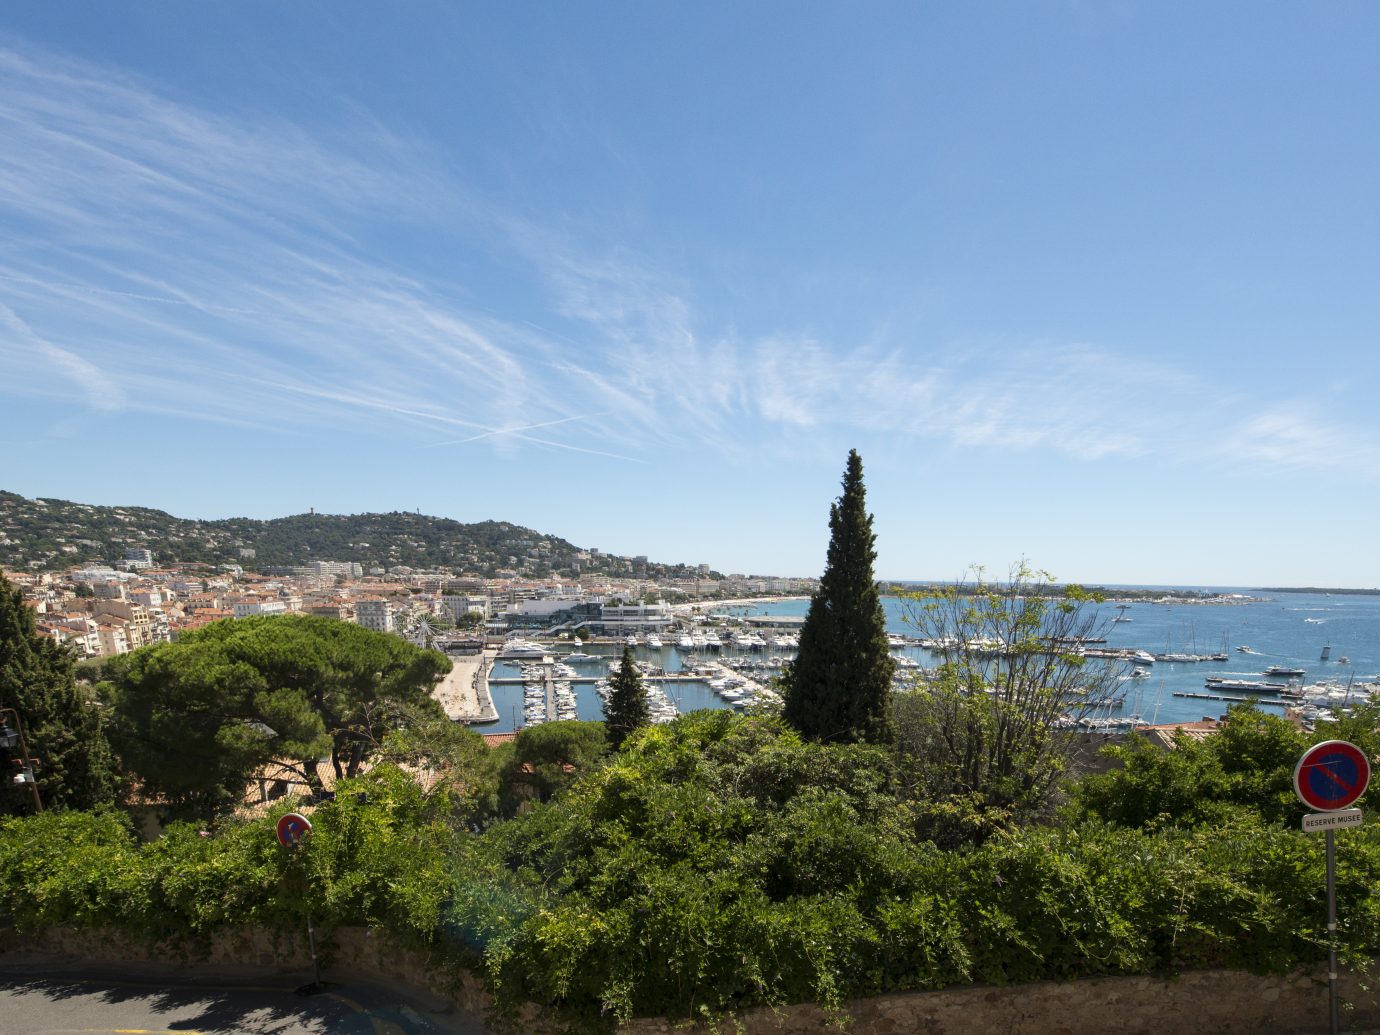 Overview of Cannes, France seen from the Castrum Museum